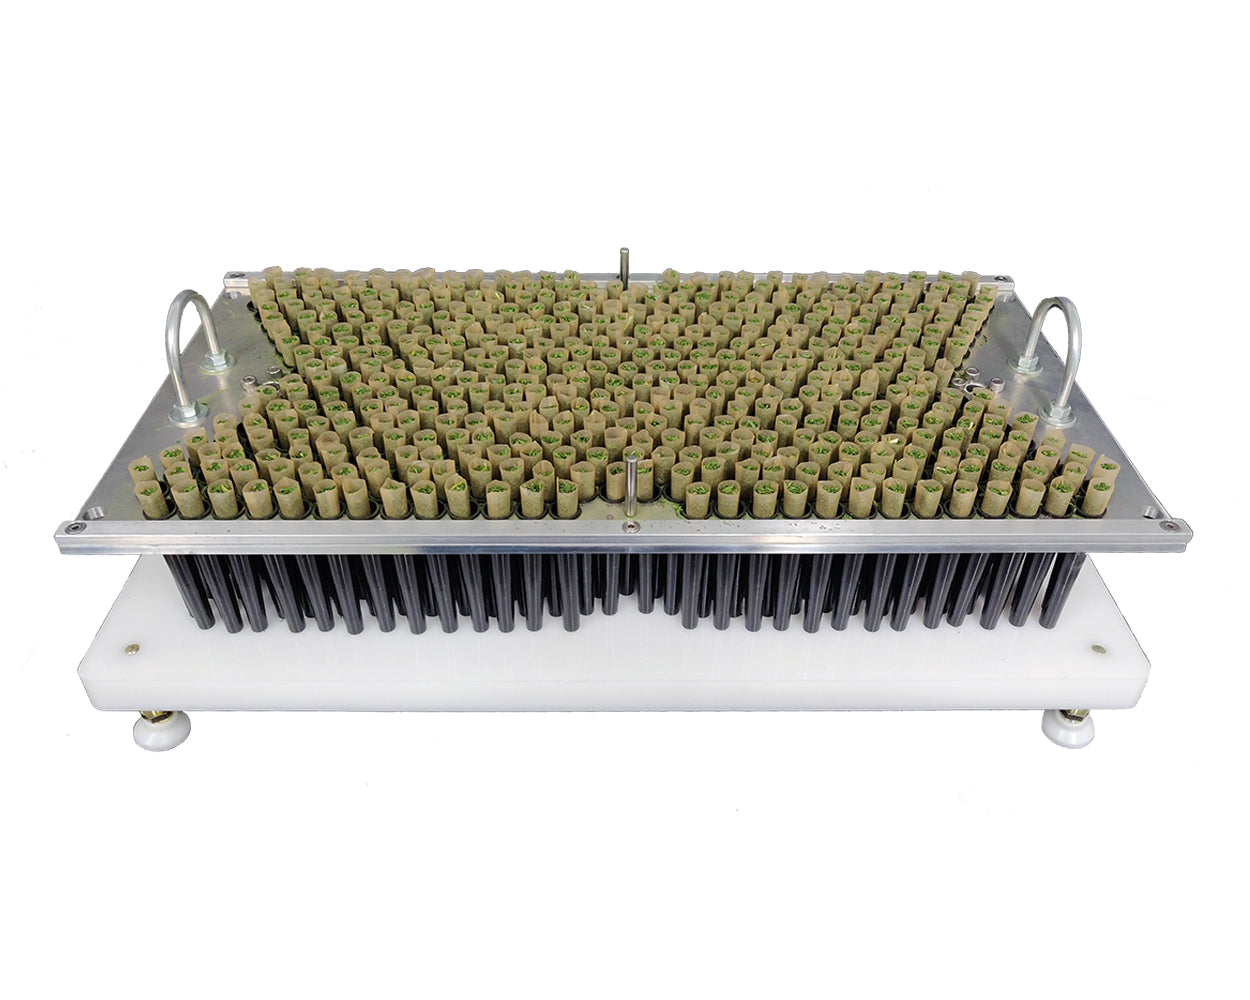 STM | Rocketbox 2.0 Pre-Roll Filling Machine w/ 84mm Tray Size | Fill 453 Joints in 1 Minute - 7